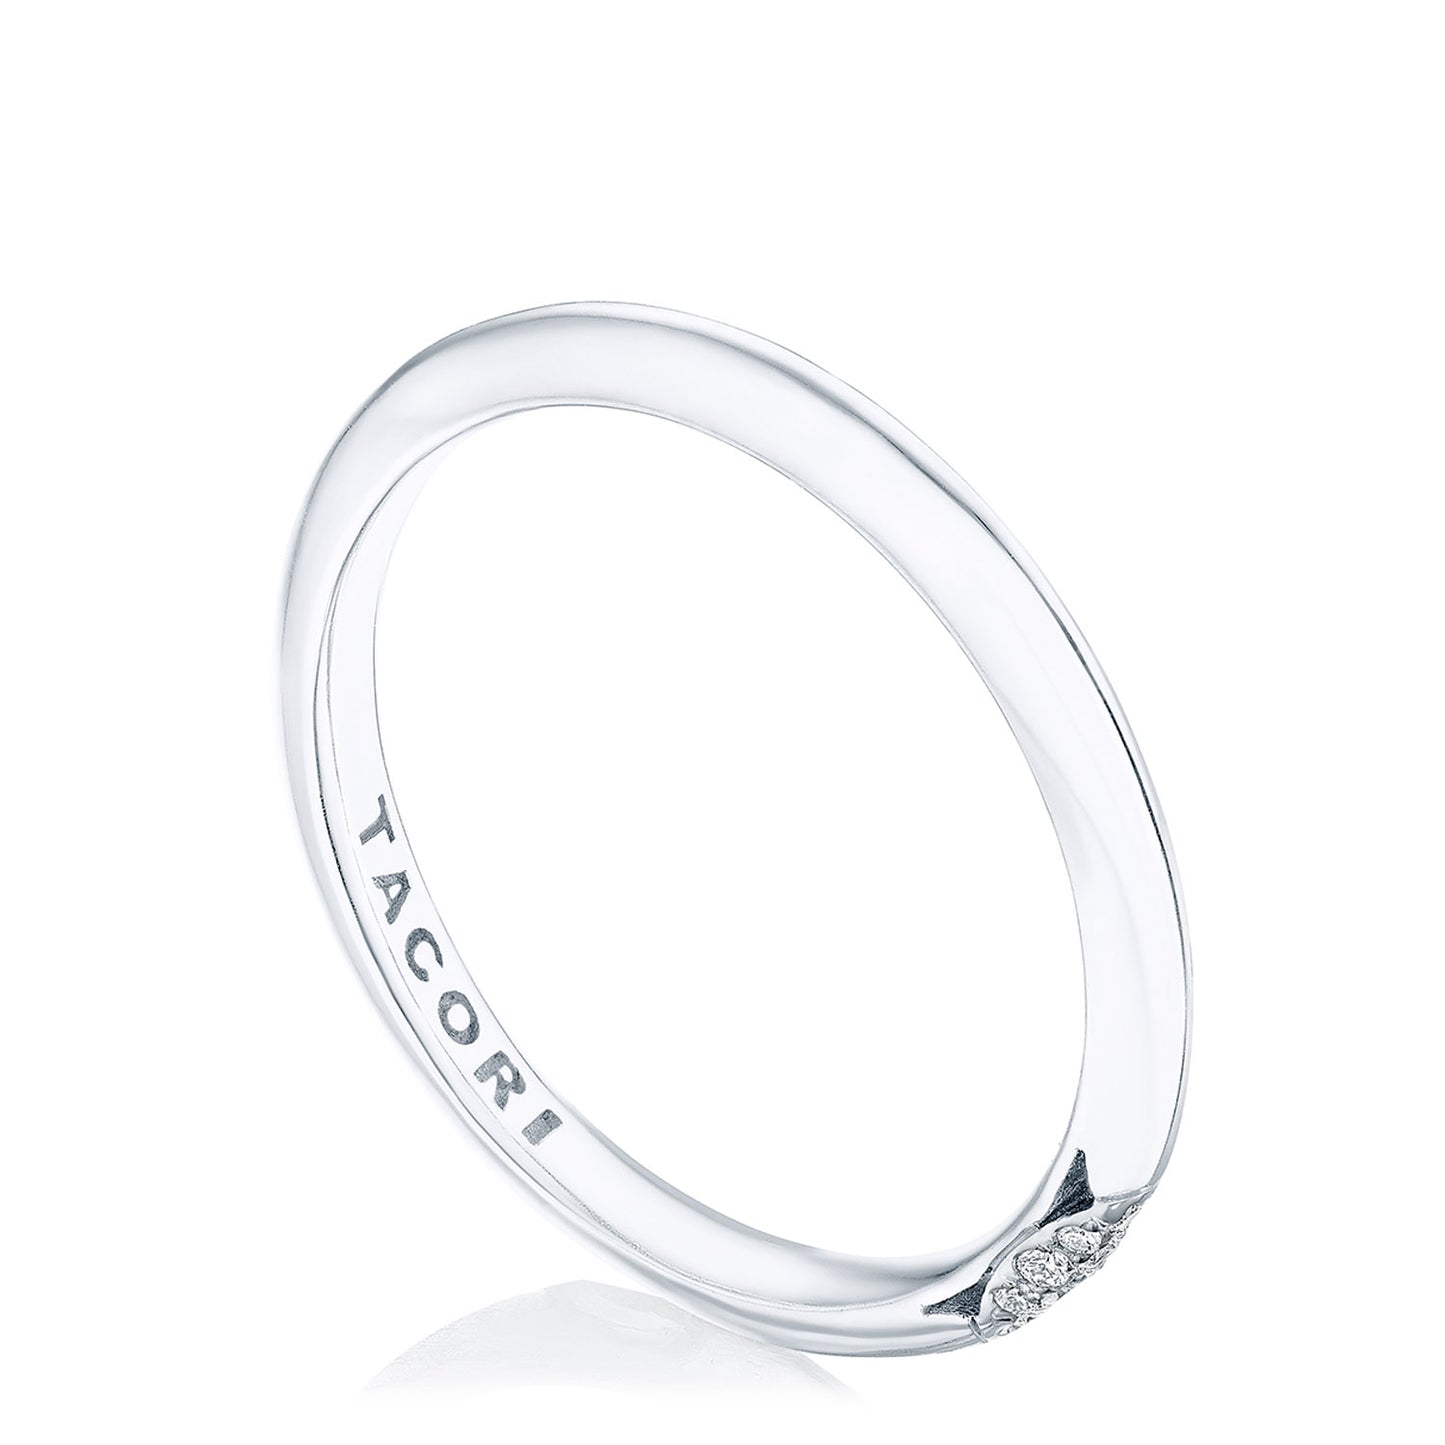 Founder's Ring Style # HT 2580 B